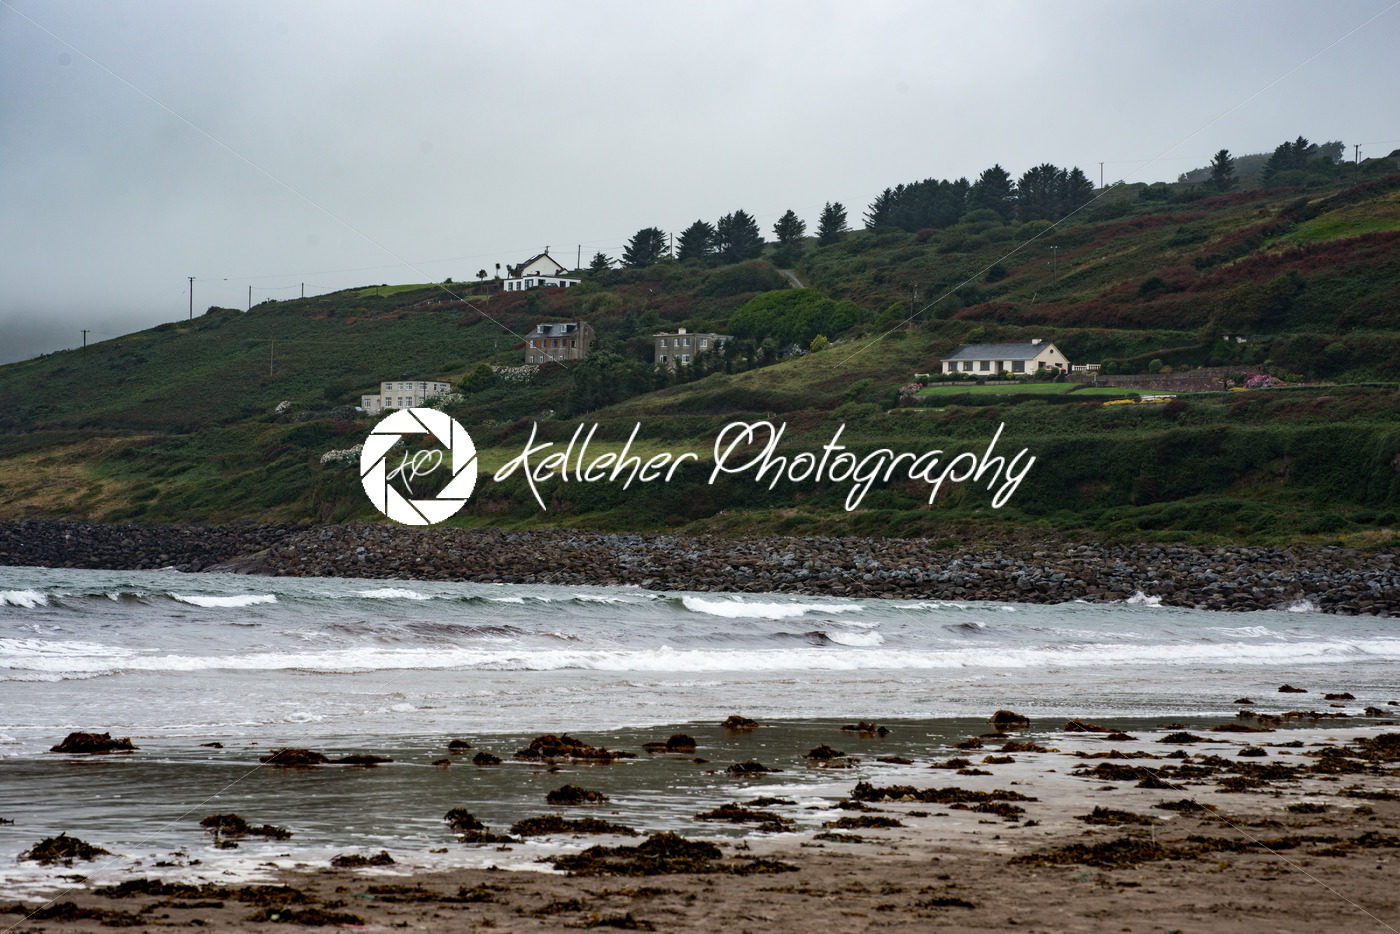 Inch Beach on the wild atlantic way in County Kerry, Ireland - Kelleher Photography Store